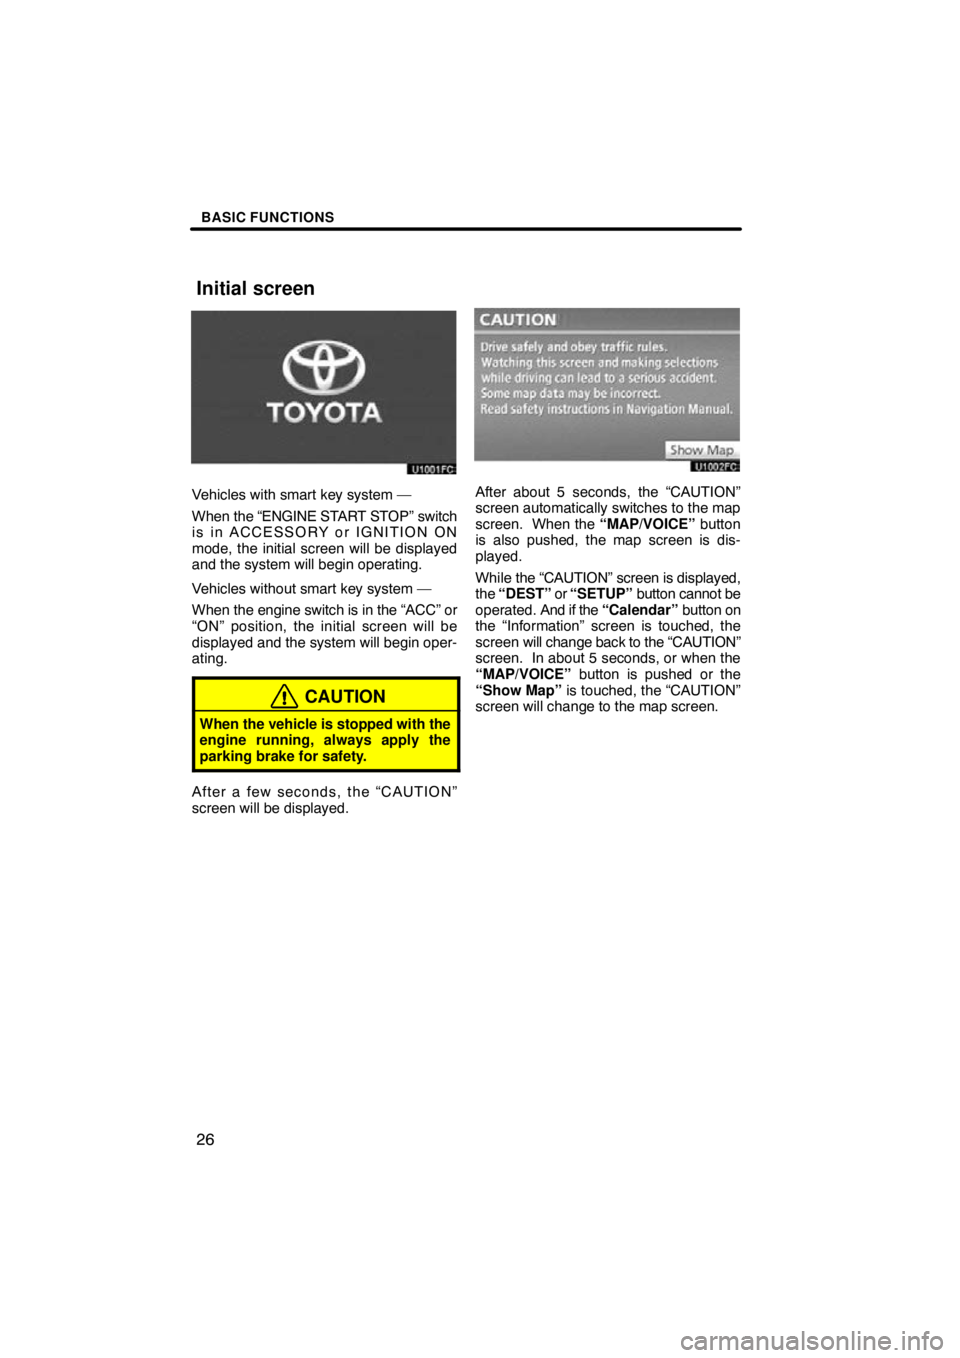 TOYOTA VENZA 2011  Accessories, Audio & Navigation (in English) BASIC FUNCTIONS
26
Vehicles with smart key system —
When the “ENGINE START STOP” switch
is in ACCESSORY or IGNITION ON
mode, the initial screen will be displayed
and the system will begin operat